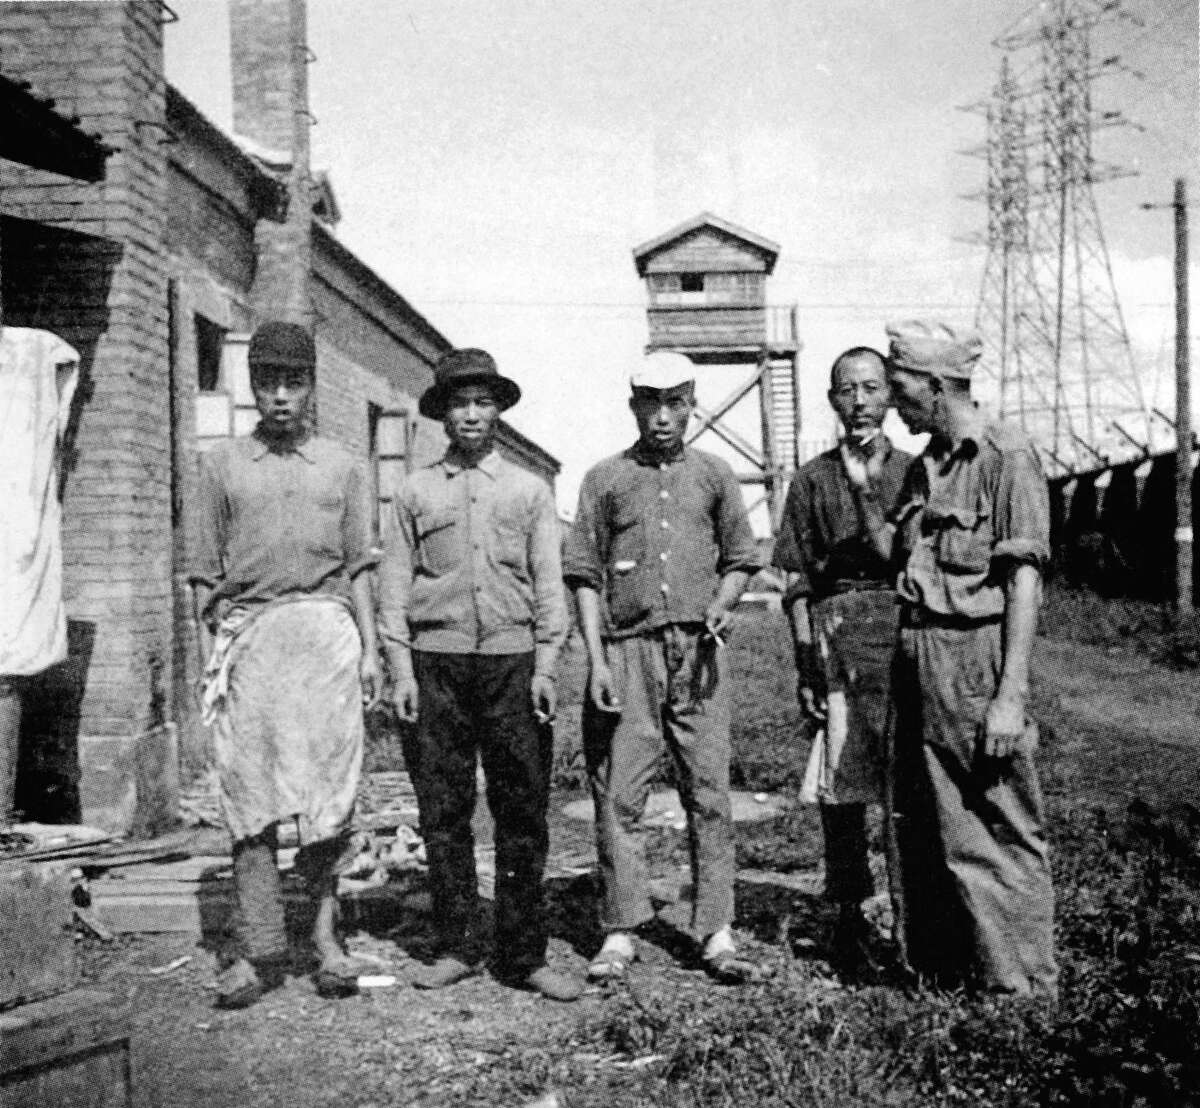 After the liberation of the Mukden POW Camp in Manchuria in August 1945, a group of Chinese chefs came in to cook for the surviving 1,300 Allied prisoners.